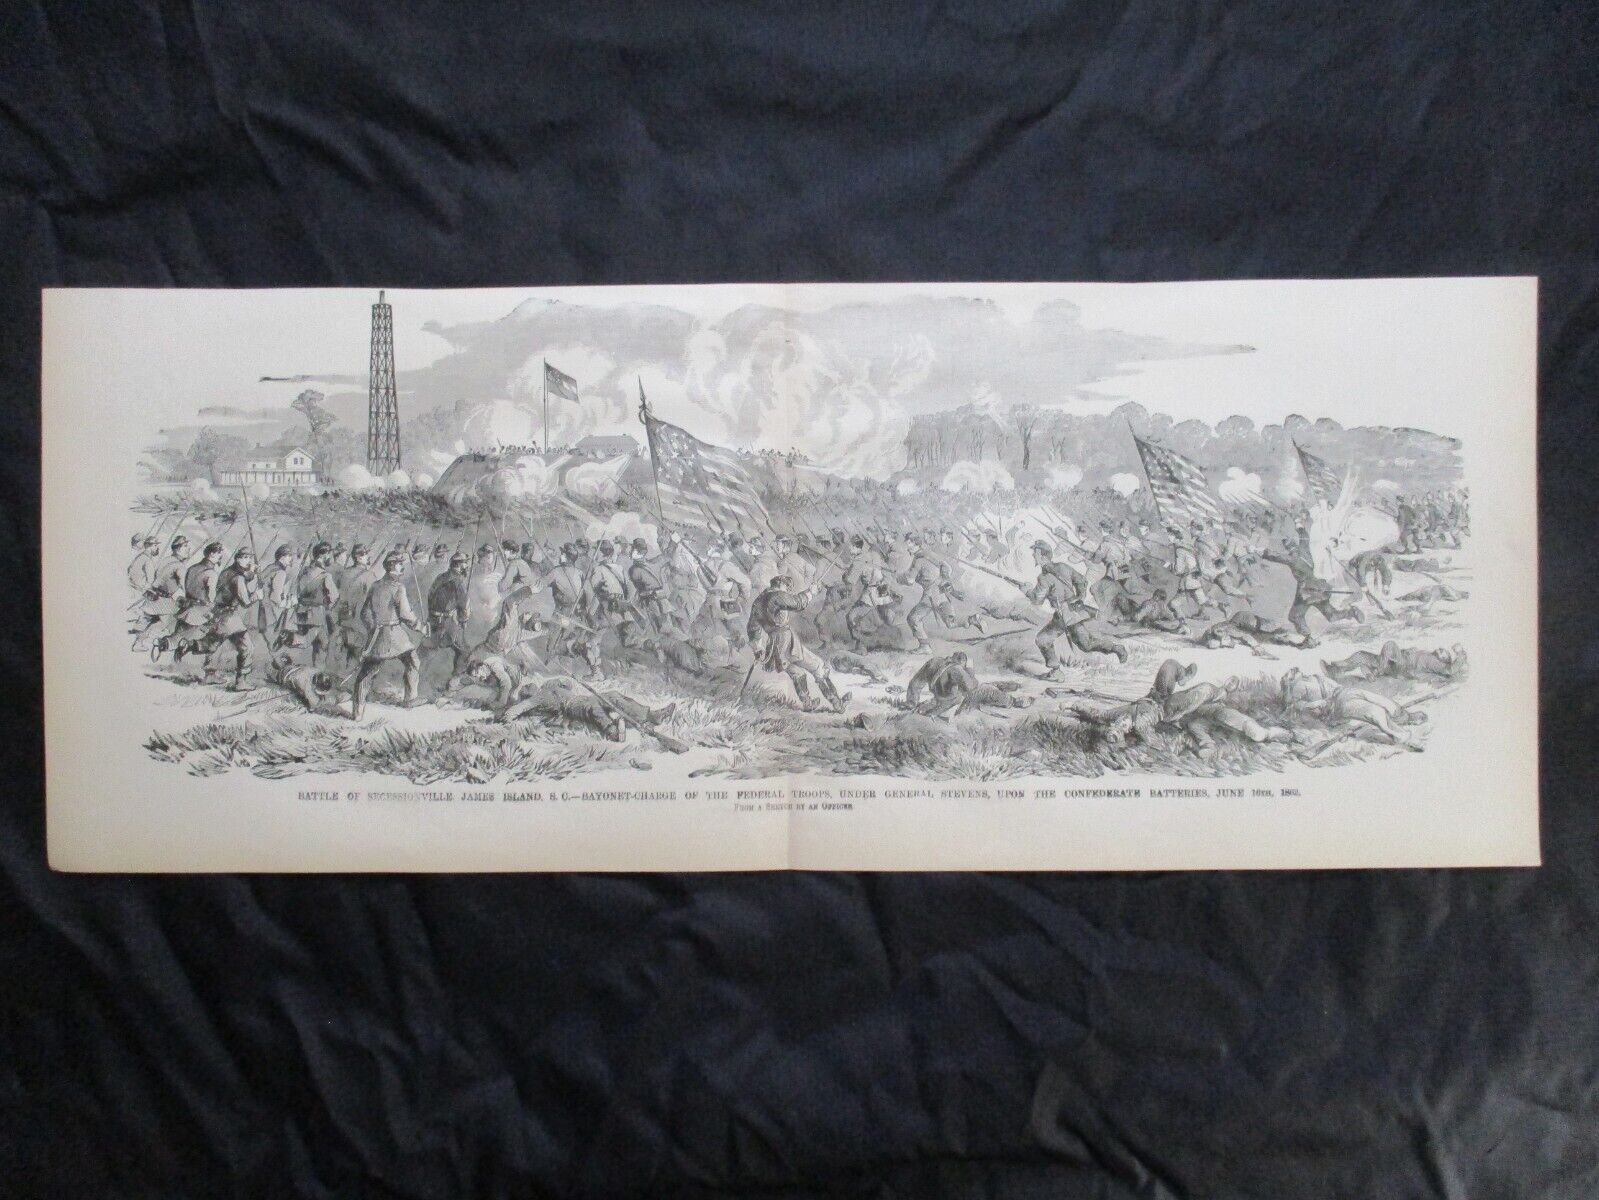 1885 Civil War Print - Federal Troops Charge Confederates, Sucessionville, 1862